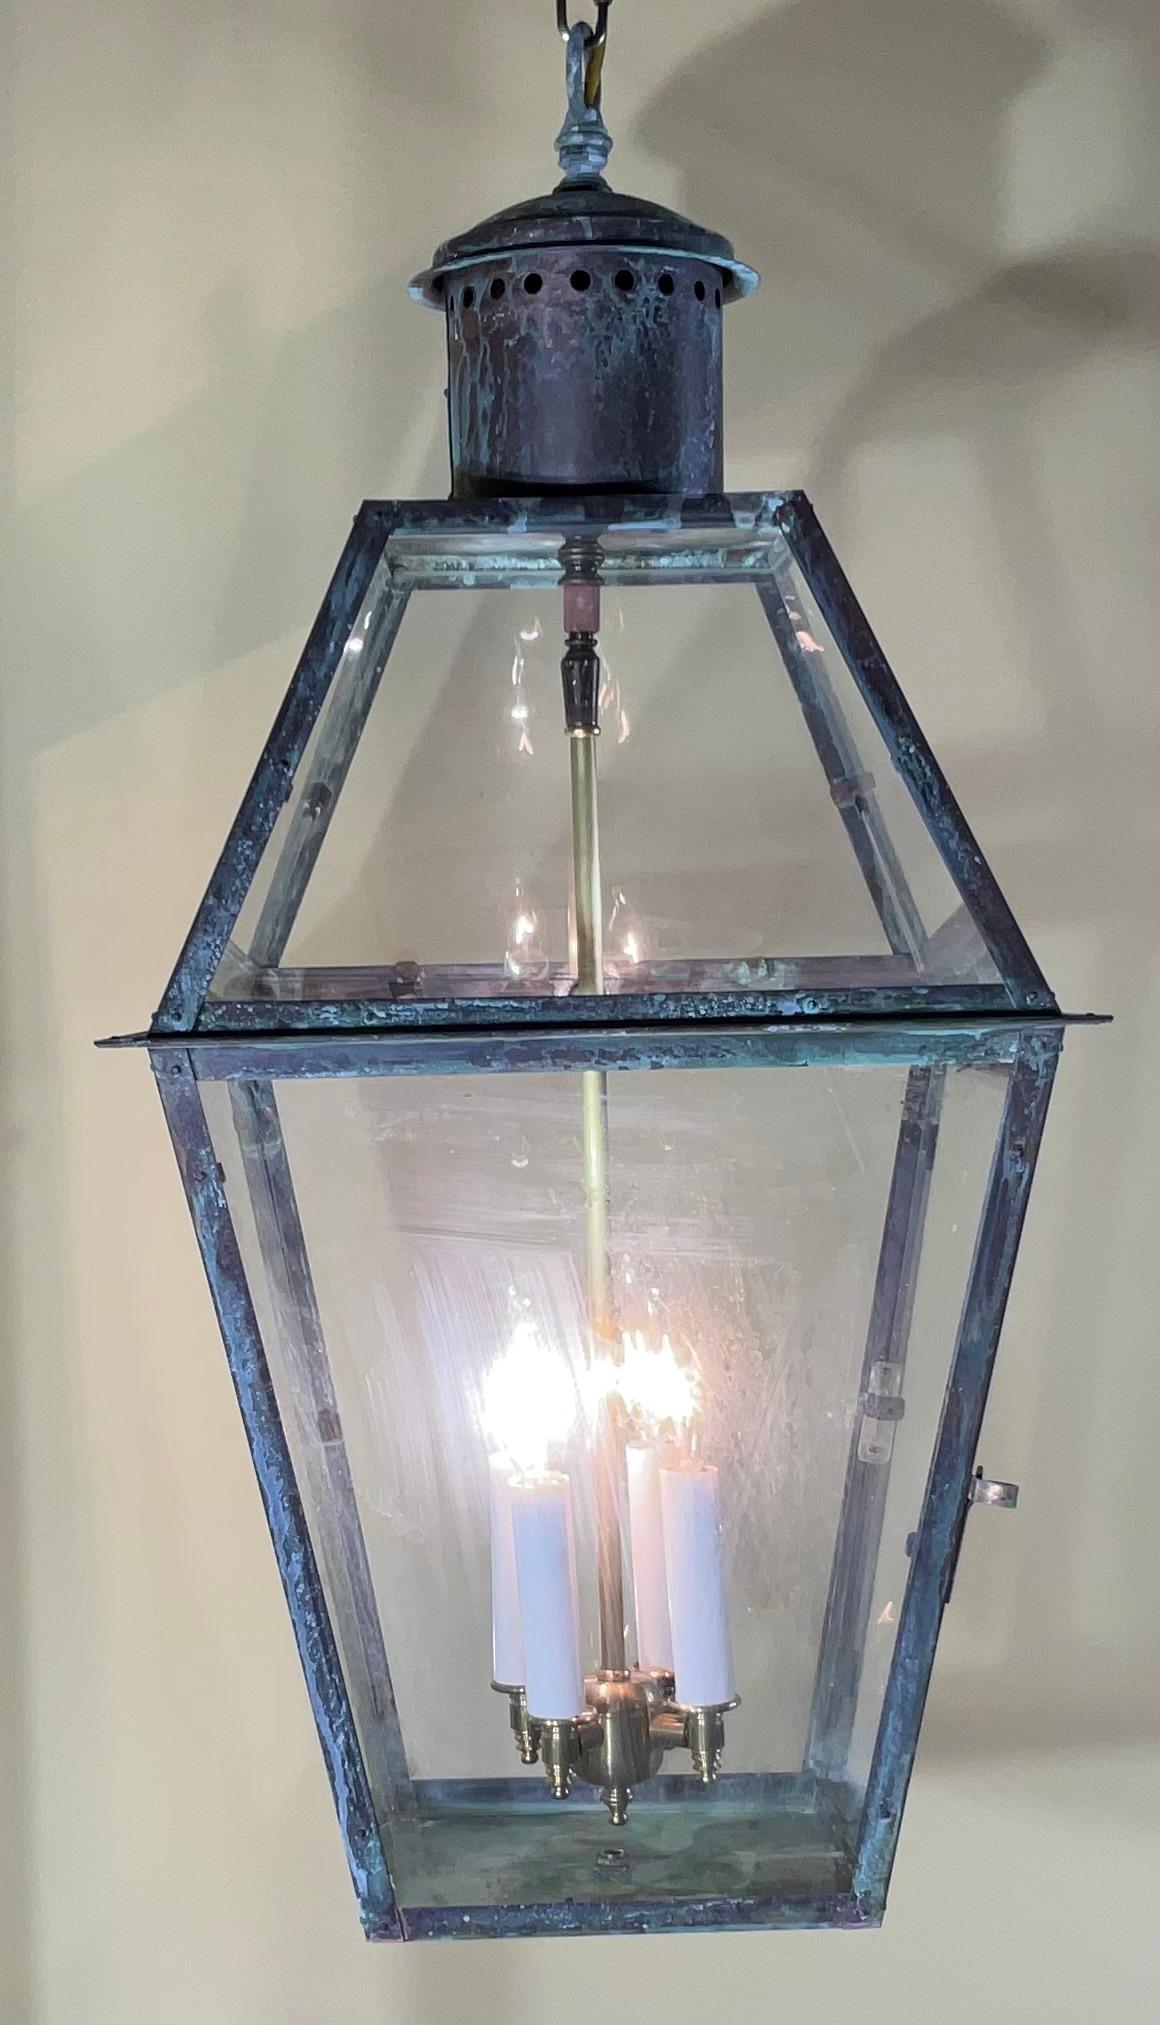 Quality handmade solid copper lantern with four 60/watt lights.
Electrified and ready to use, Beautiful oxidization patina. Suitable for wet locations or indoor 
Chain and canopy included.